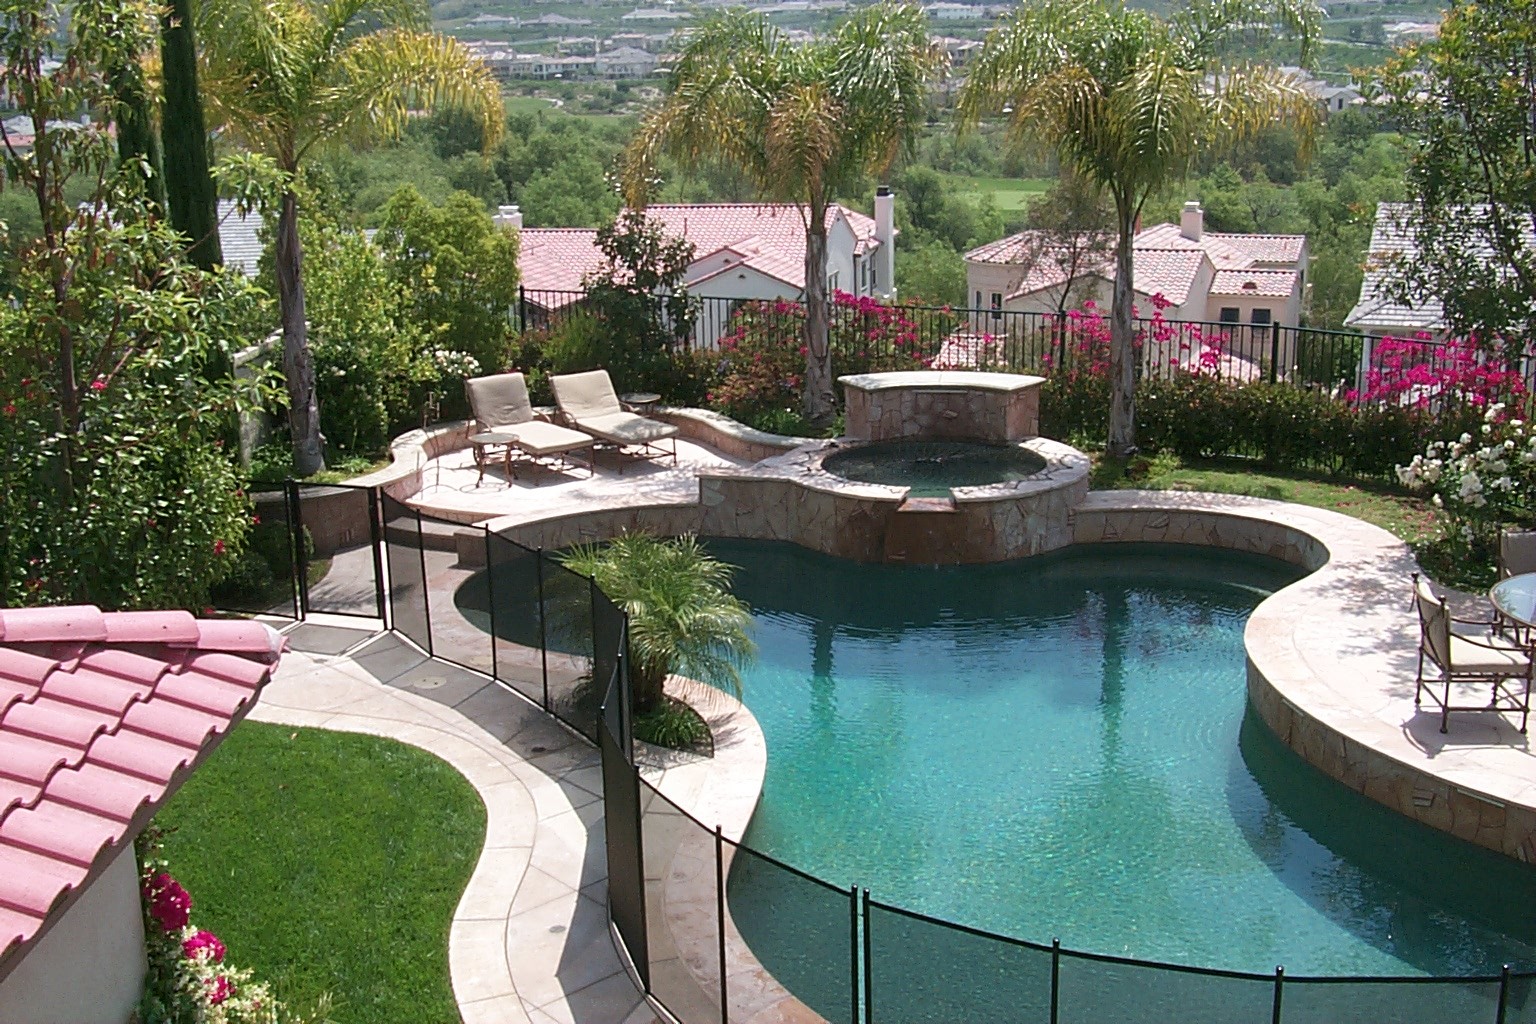 Impressive pool fence design ideas 10 Best Pool Fence Ideas With Pictures Decor Or Design